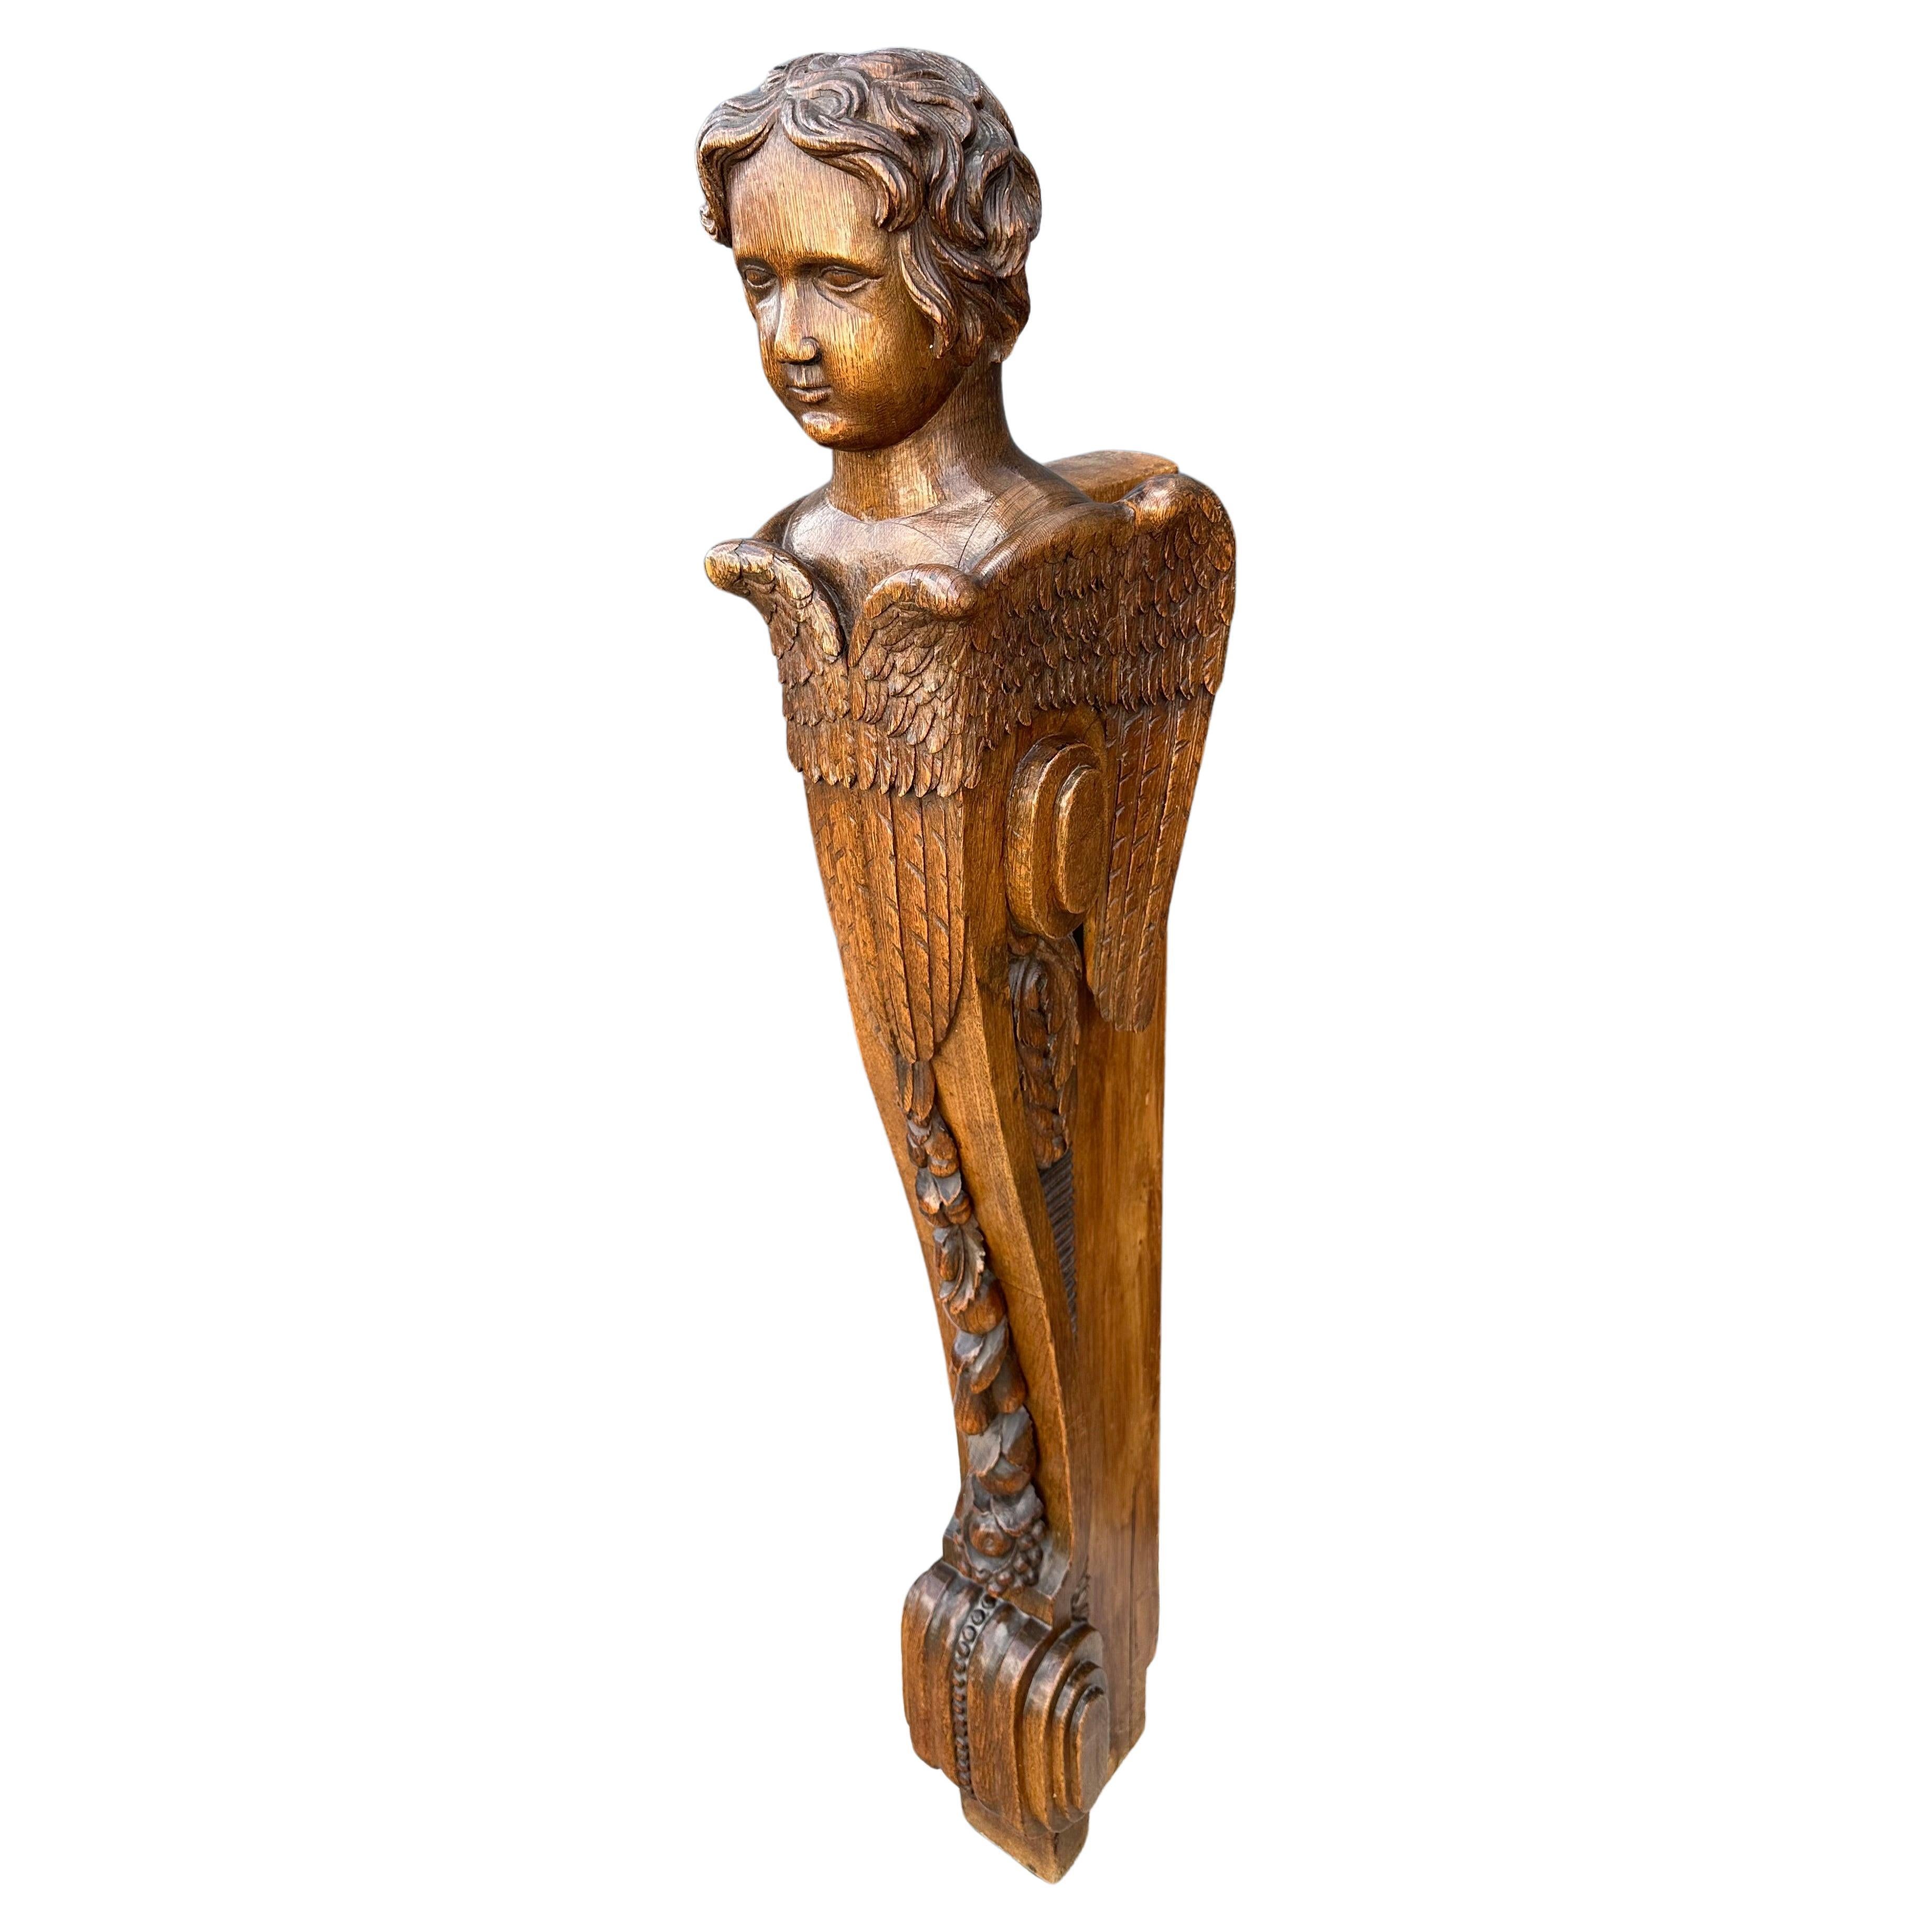 Antique Hand Carved Oak Stair Rail Newel Post w. Winged Angel Sculpture 19thC. For Sale